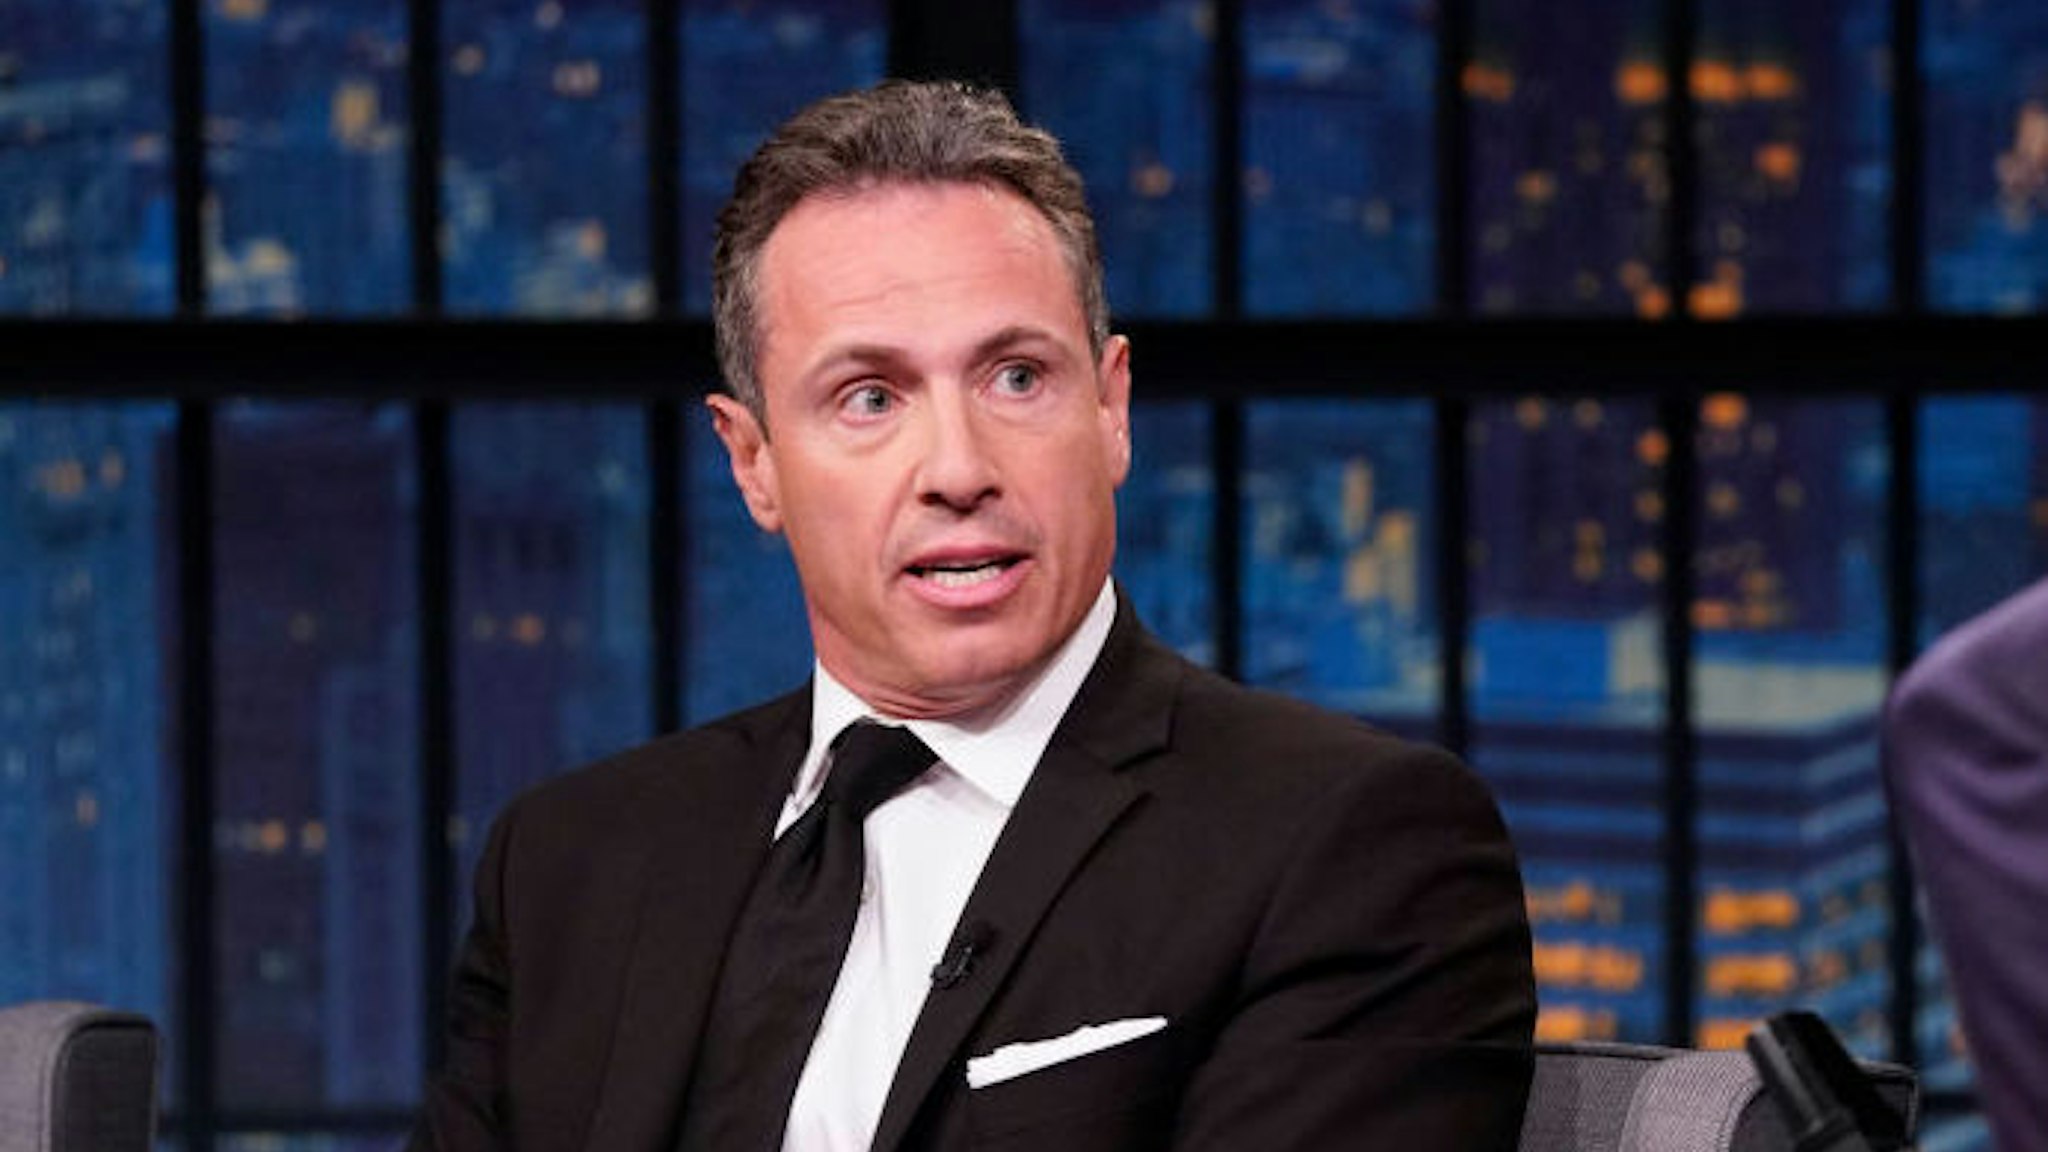 LATE NIGHT WITH SETH MEYERS -- Episode 867 -- Pictured: (l-r) CNN's Chris Cuomo during an interview with host Seth Meyers on August 1, 2019 -- (Photo by: Lloyd Bishop/NBC/NBCU Photo Bank)